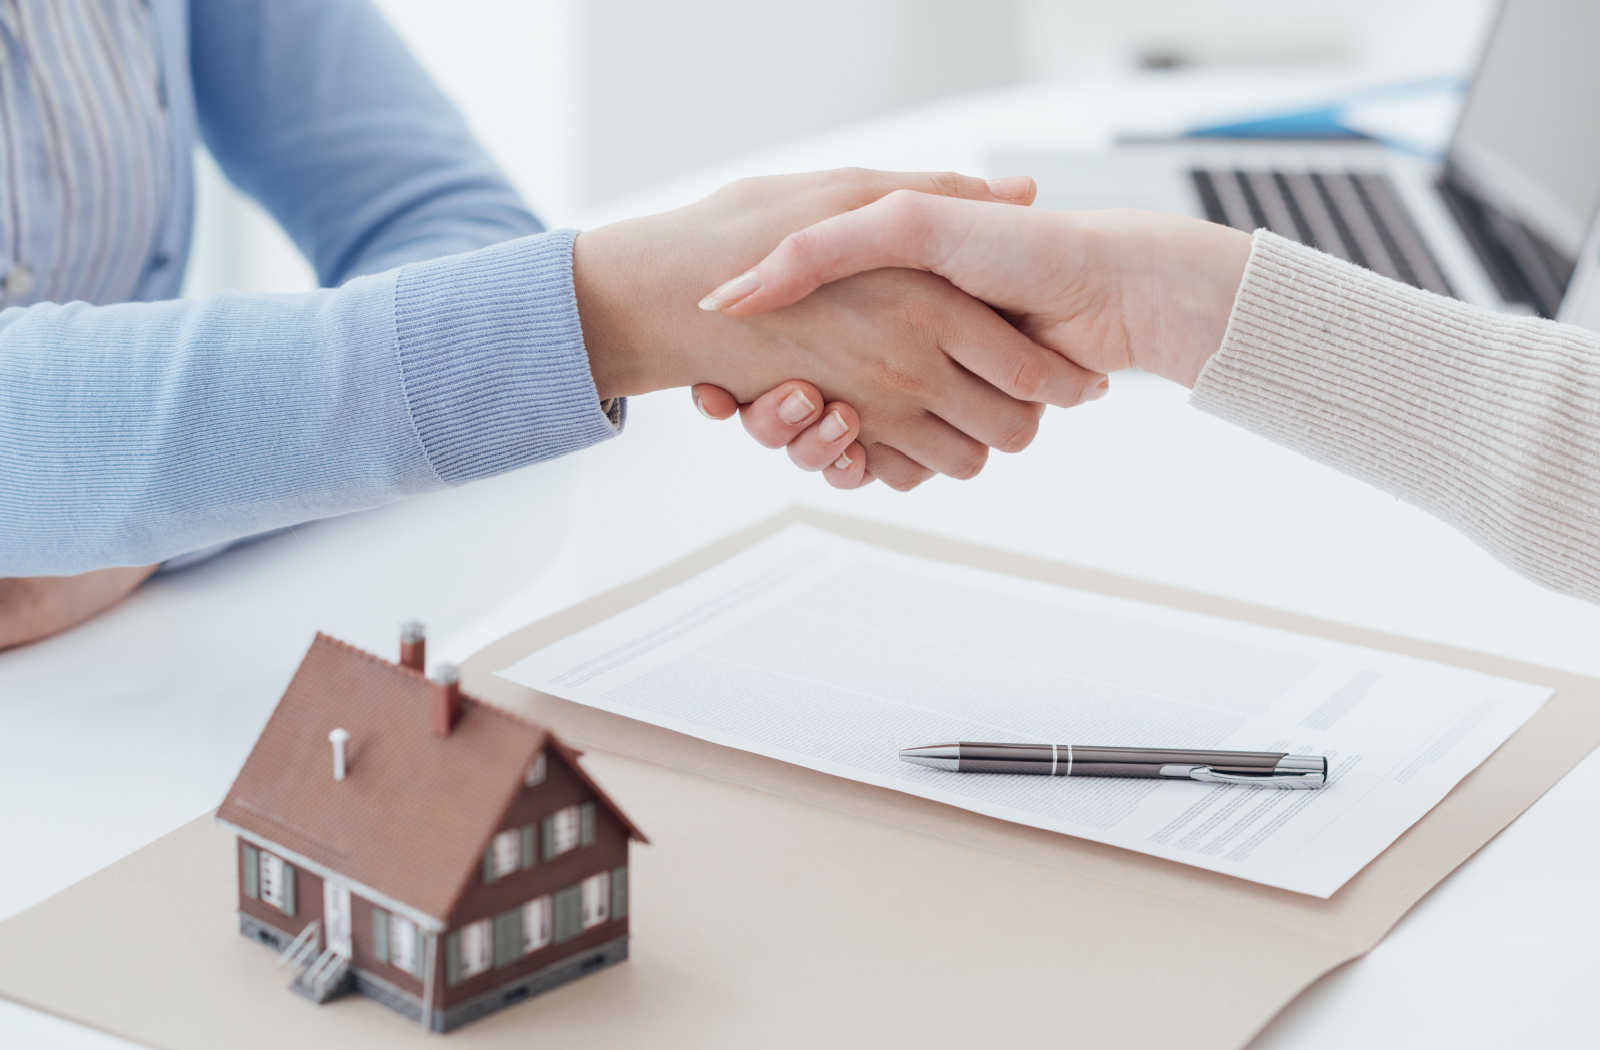 A client and mortgage broker shaking hands over a mortgage document with a model house sitting on the desk